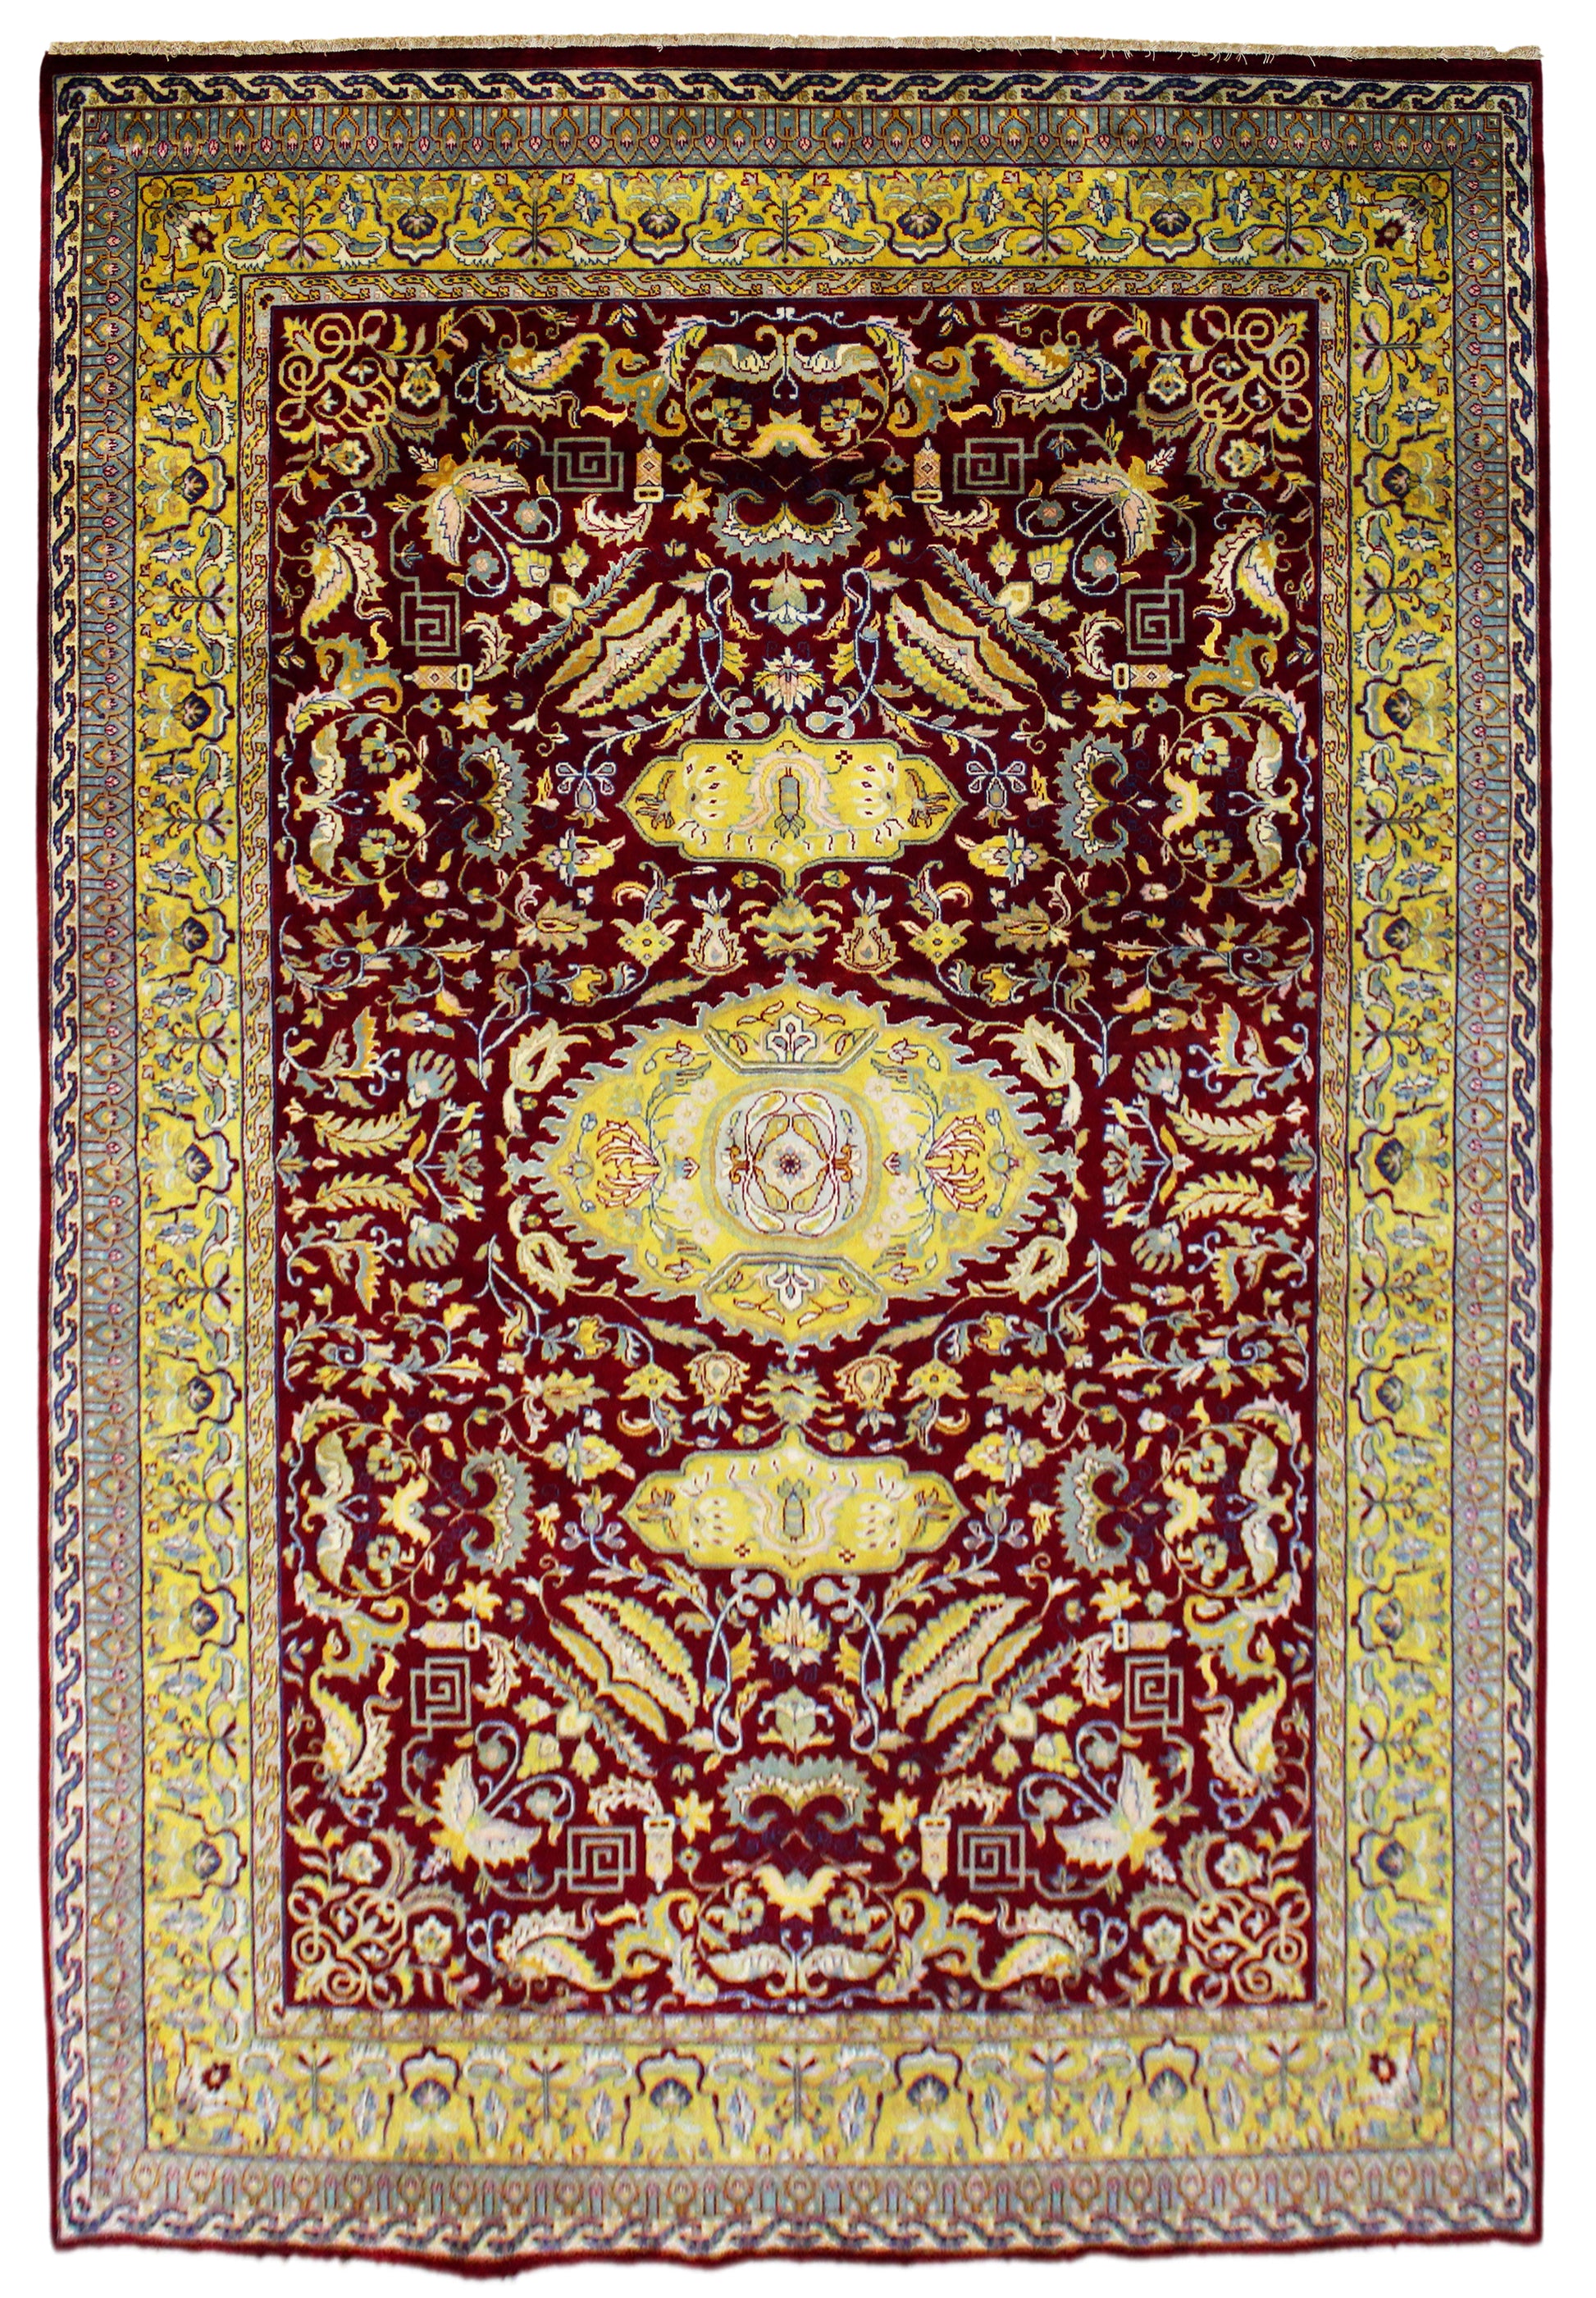 Sultanabad Area Rug 267cm x 181cm